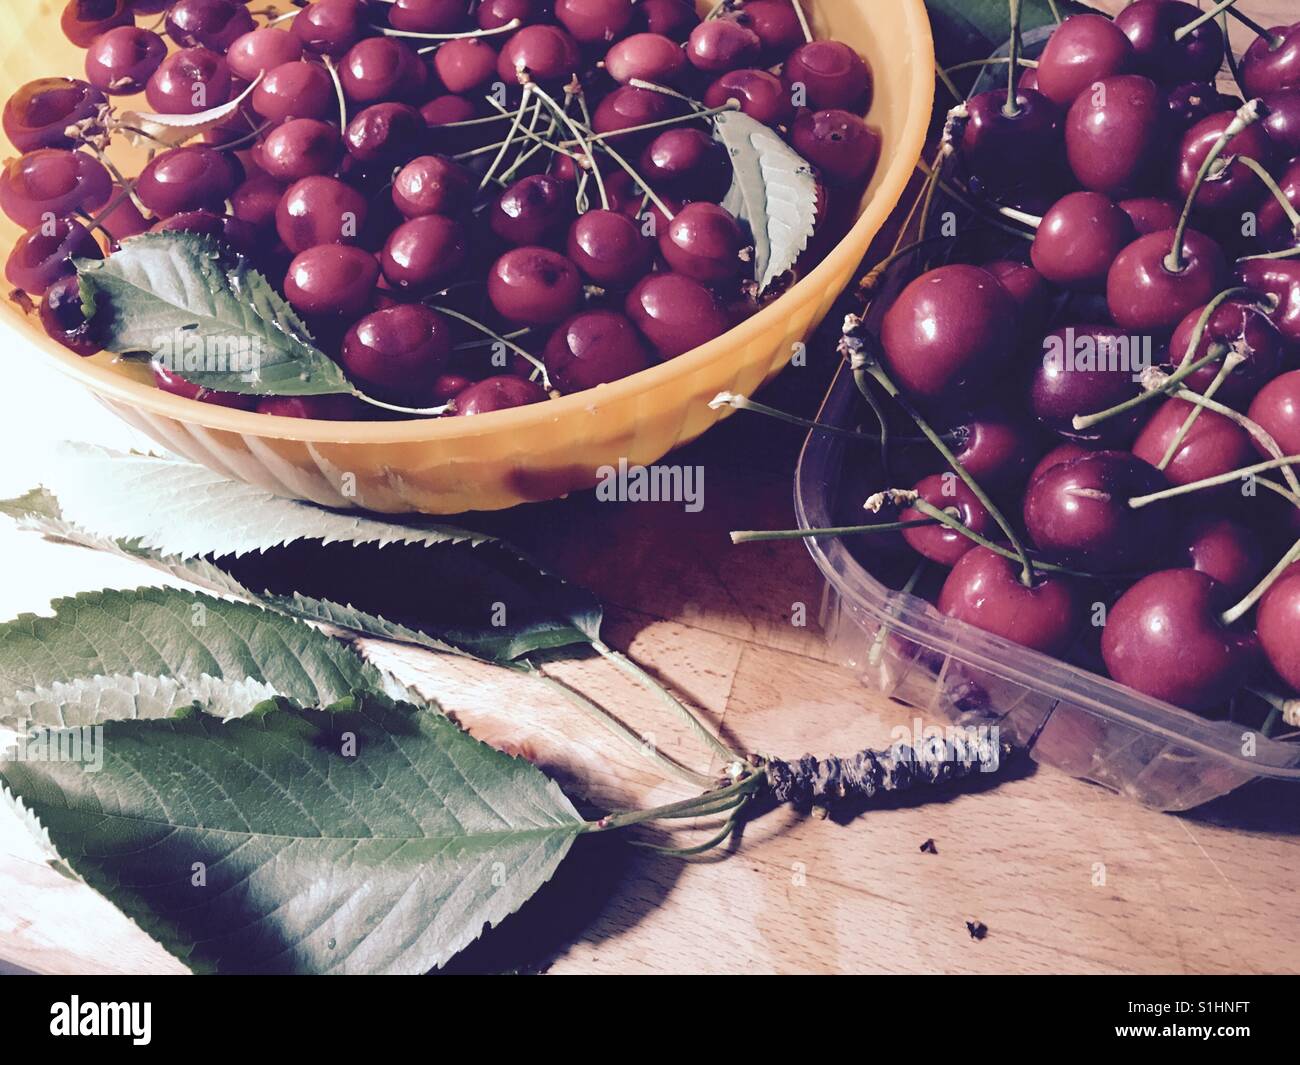 Cherries harvested in a garden in London Stock Photo